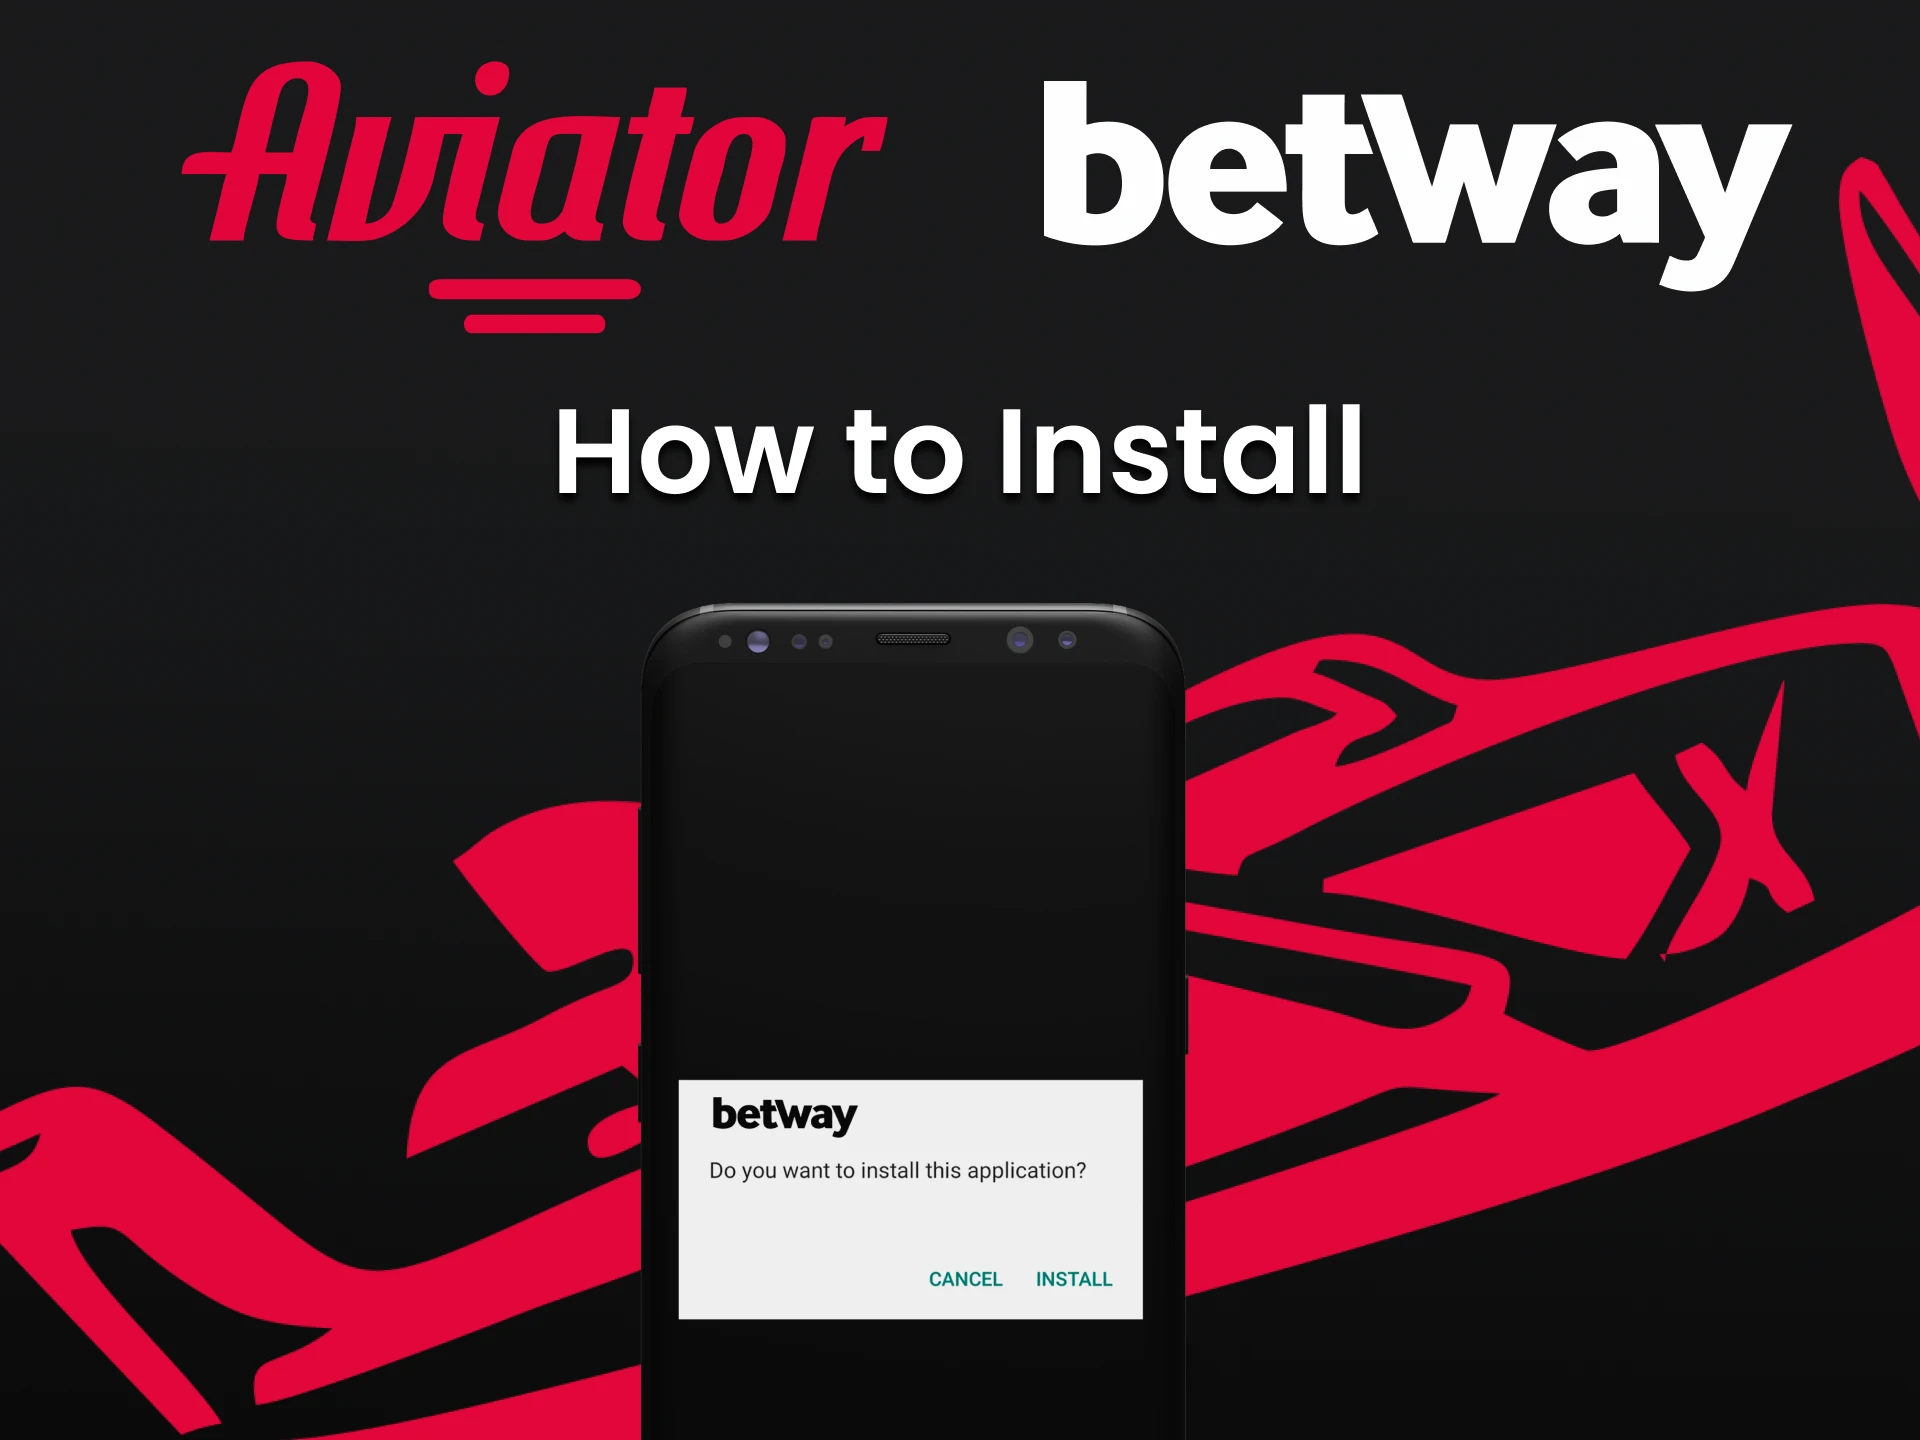 Install the application from Betway to play Aviator.